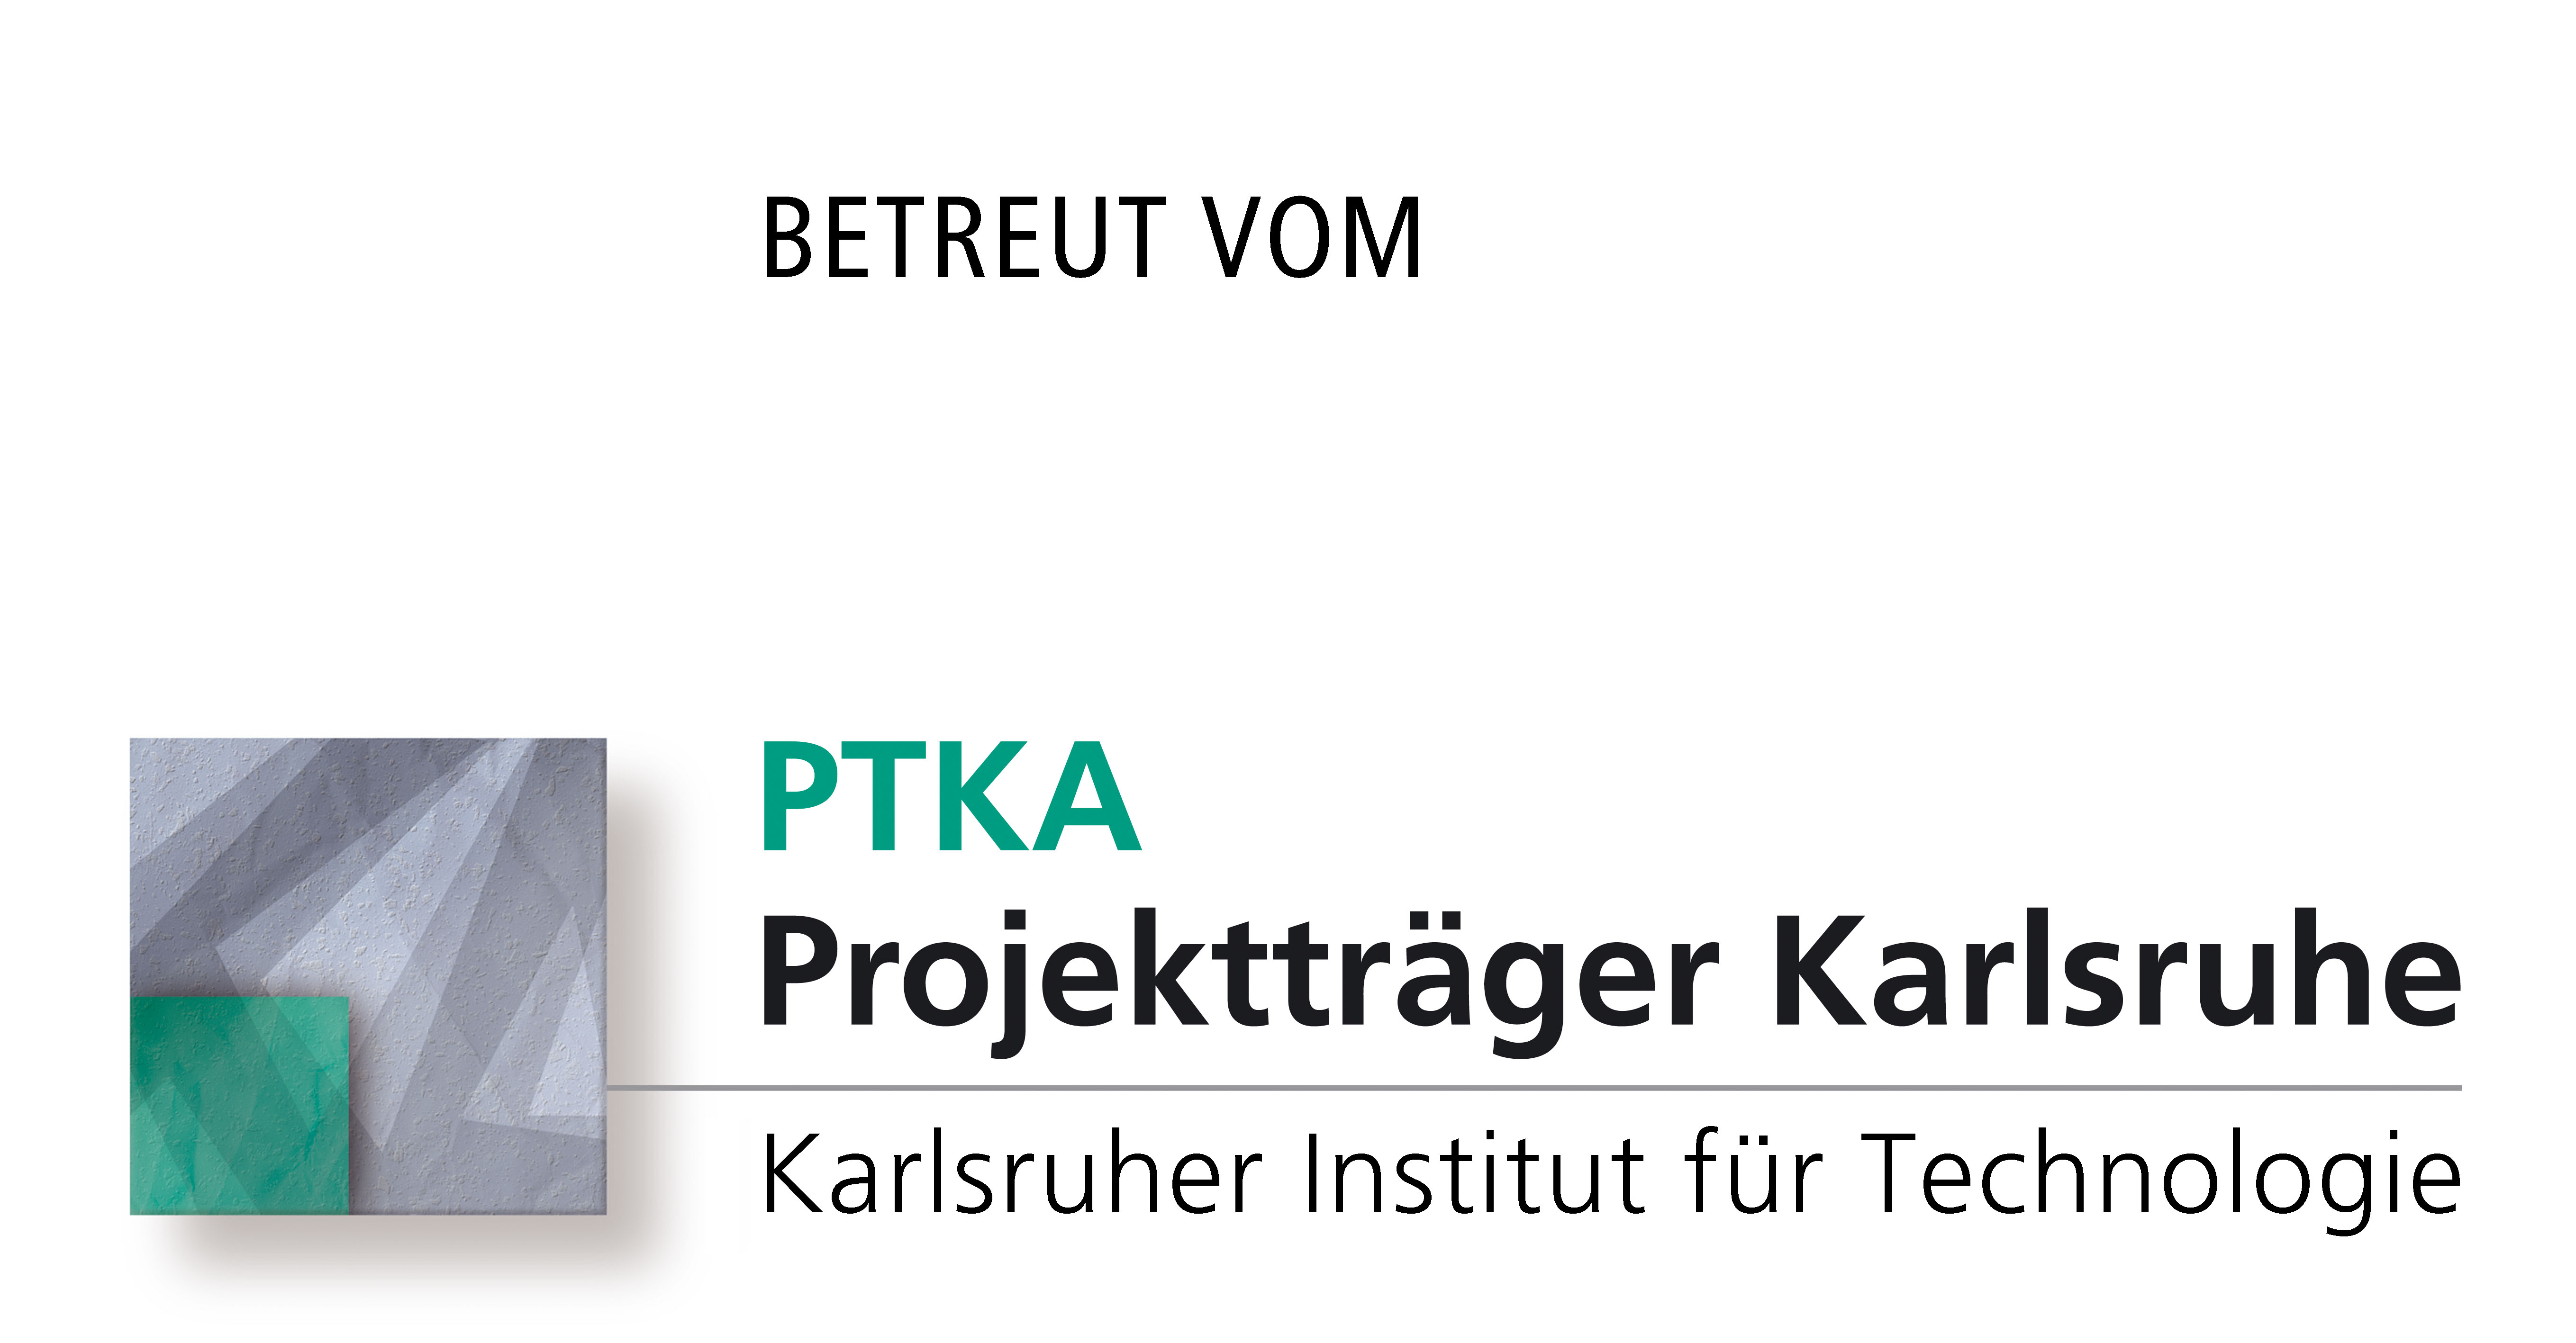 Maintained by the Karlsruhe Institute of Technology